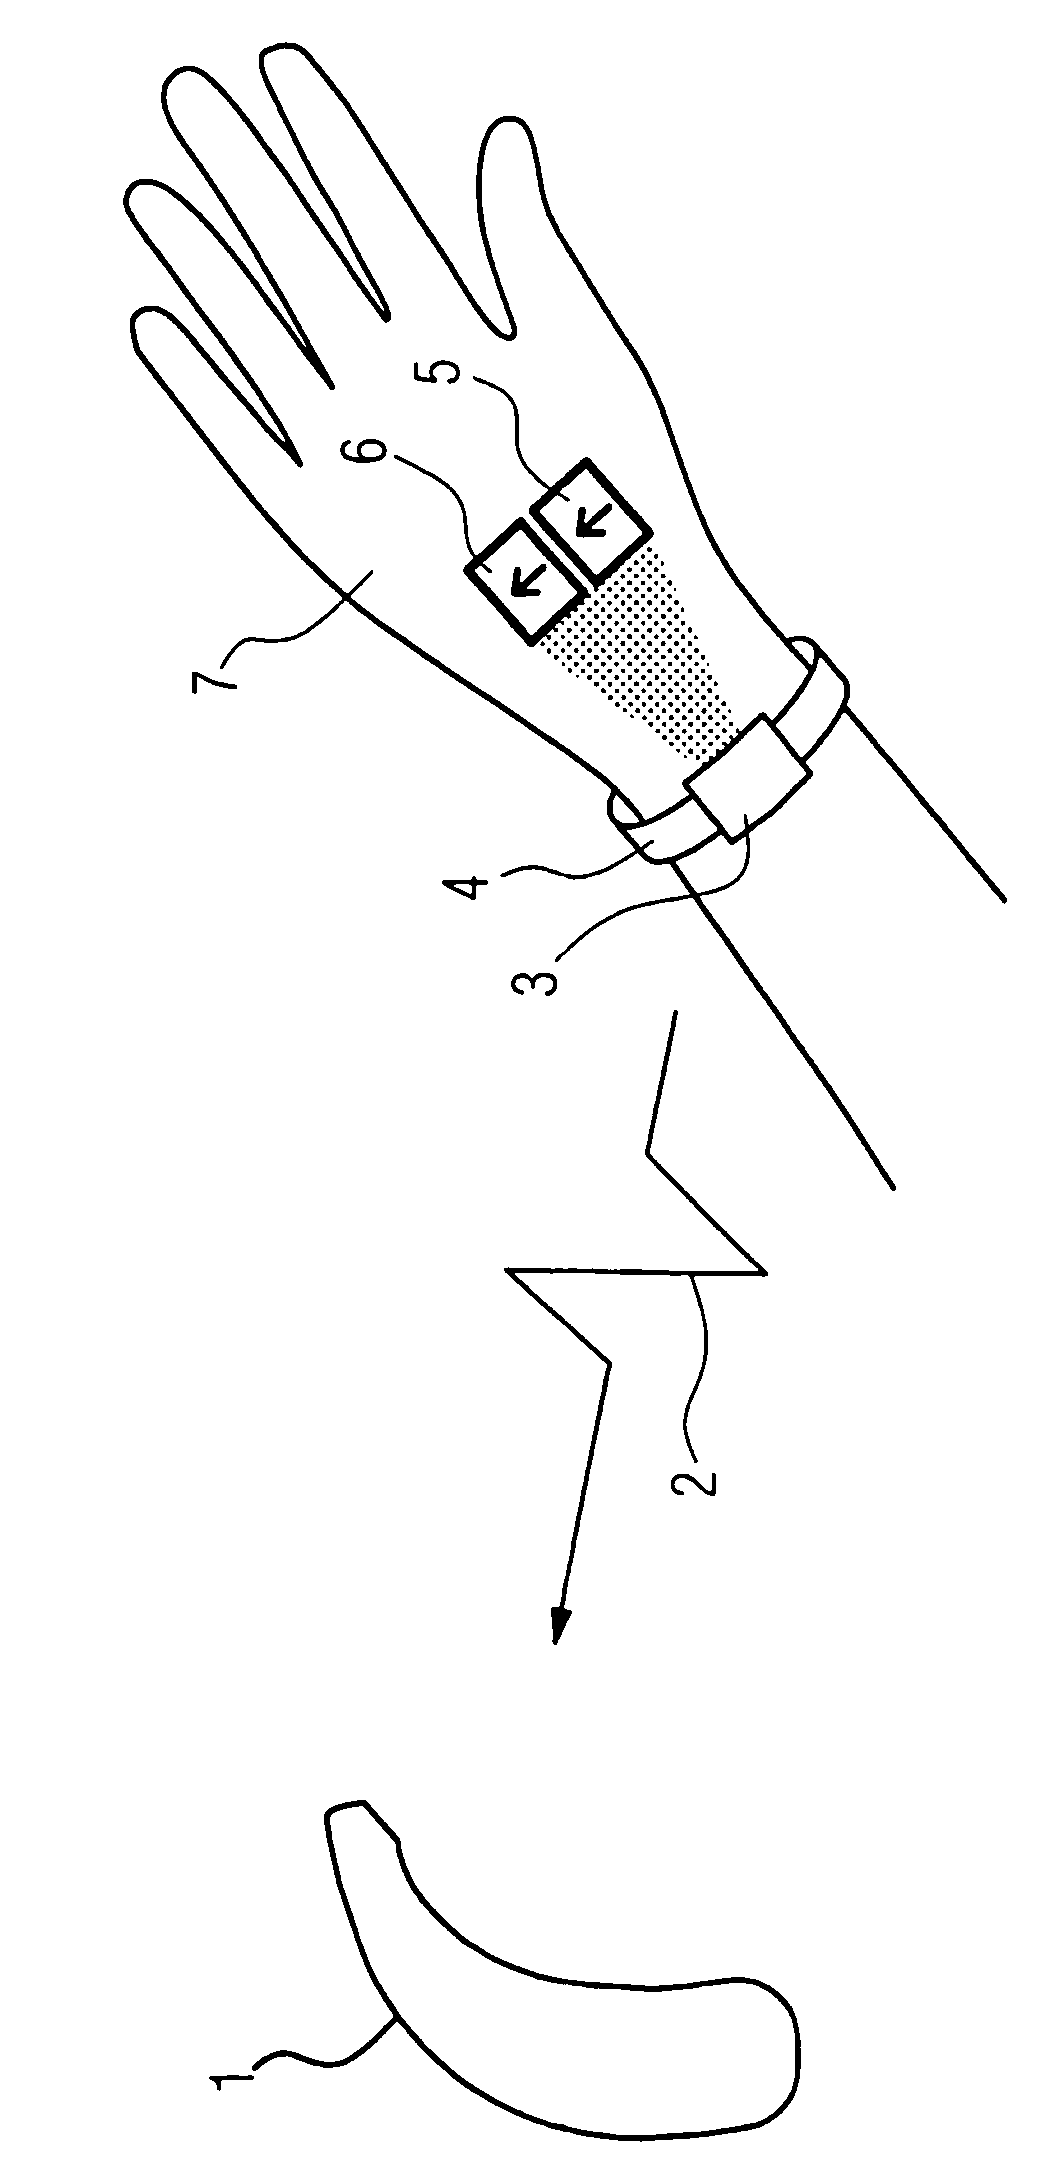 Device and method to remotely operate a hearing device